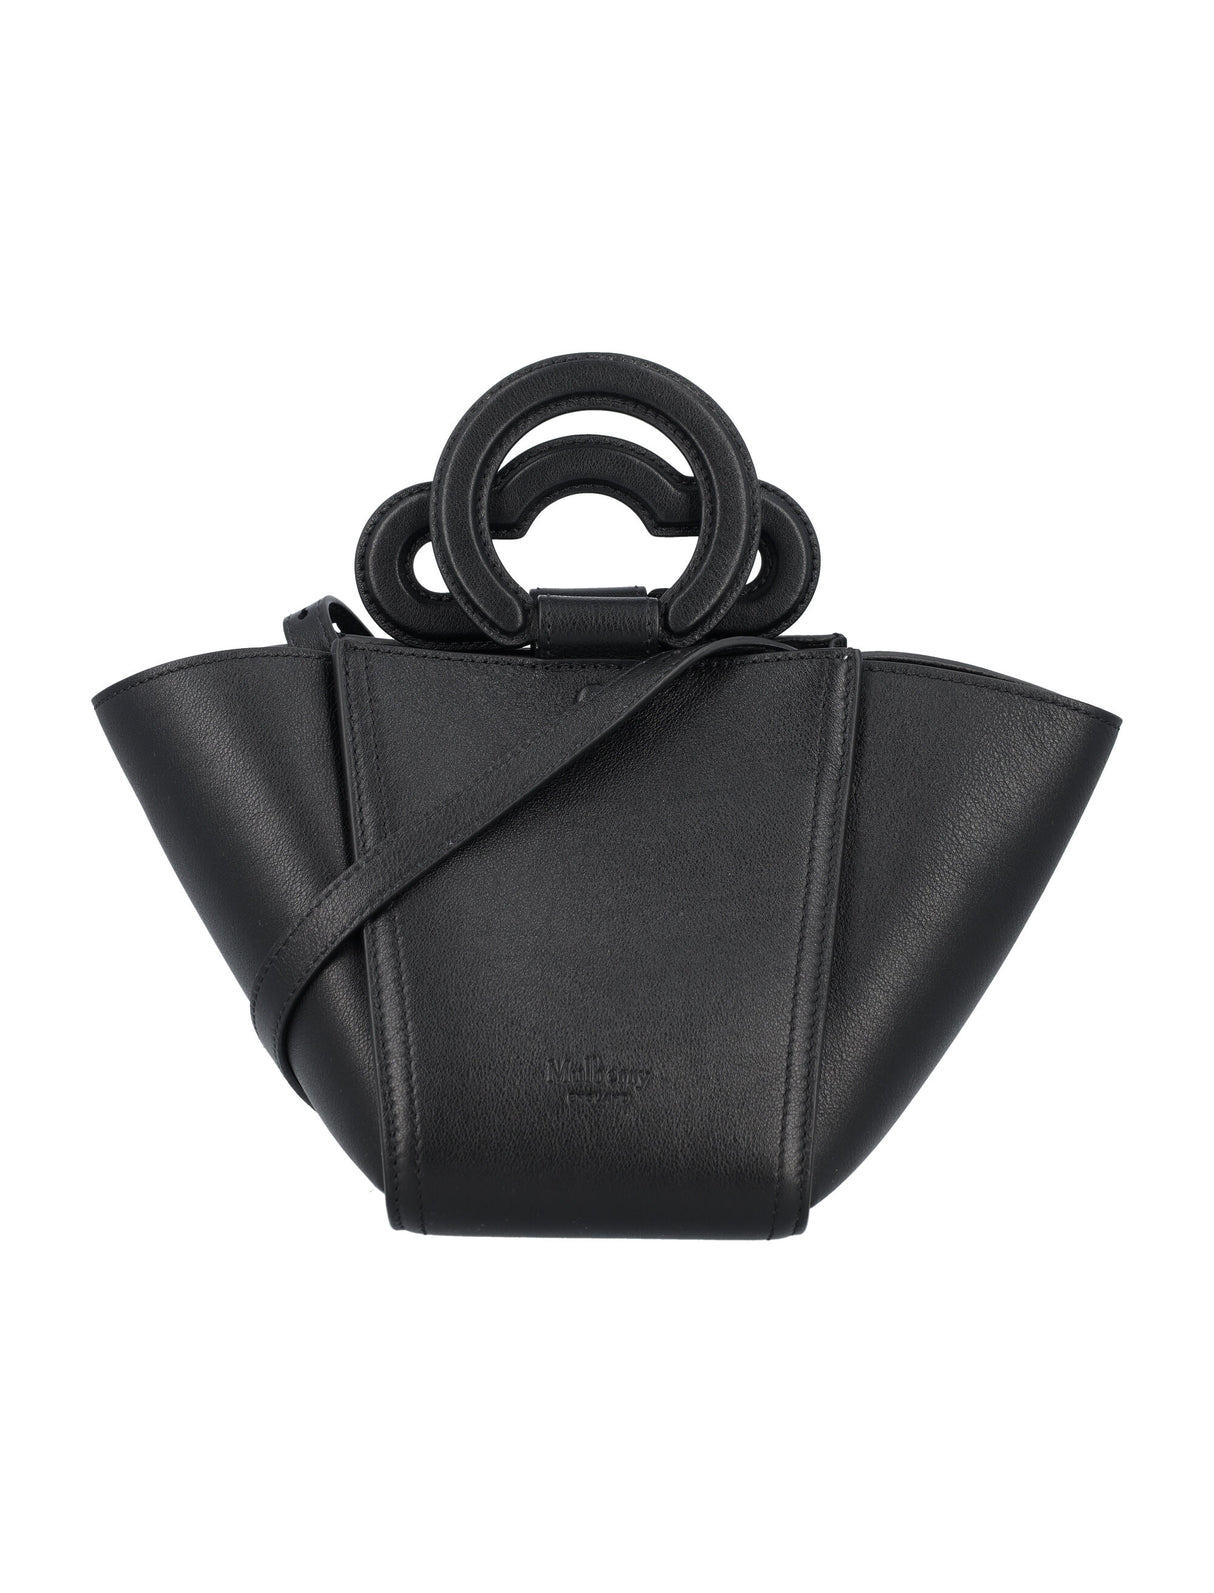 MULBERRY Mini Rider's Silky Leather Top Handle Bag with Detachable Strap - Black, 26x16.5x16 cm